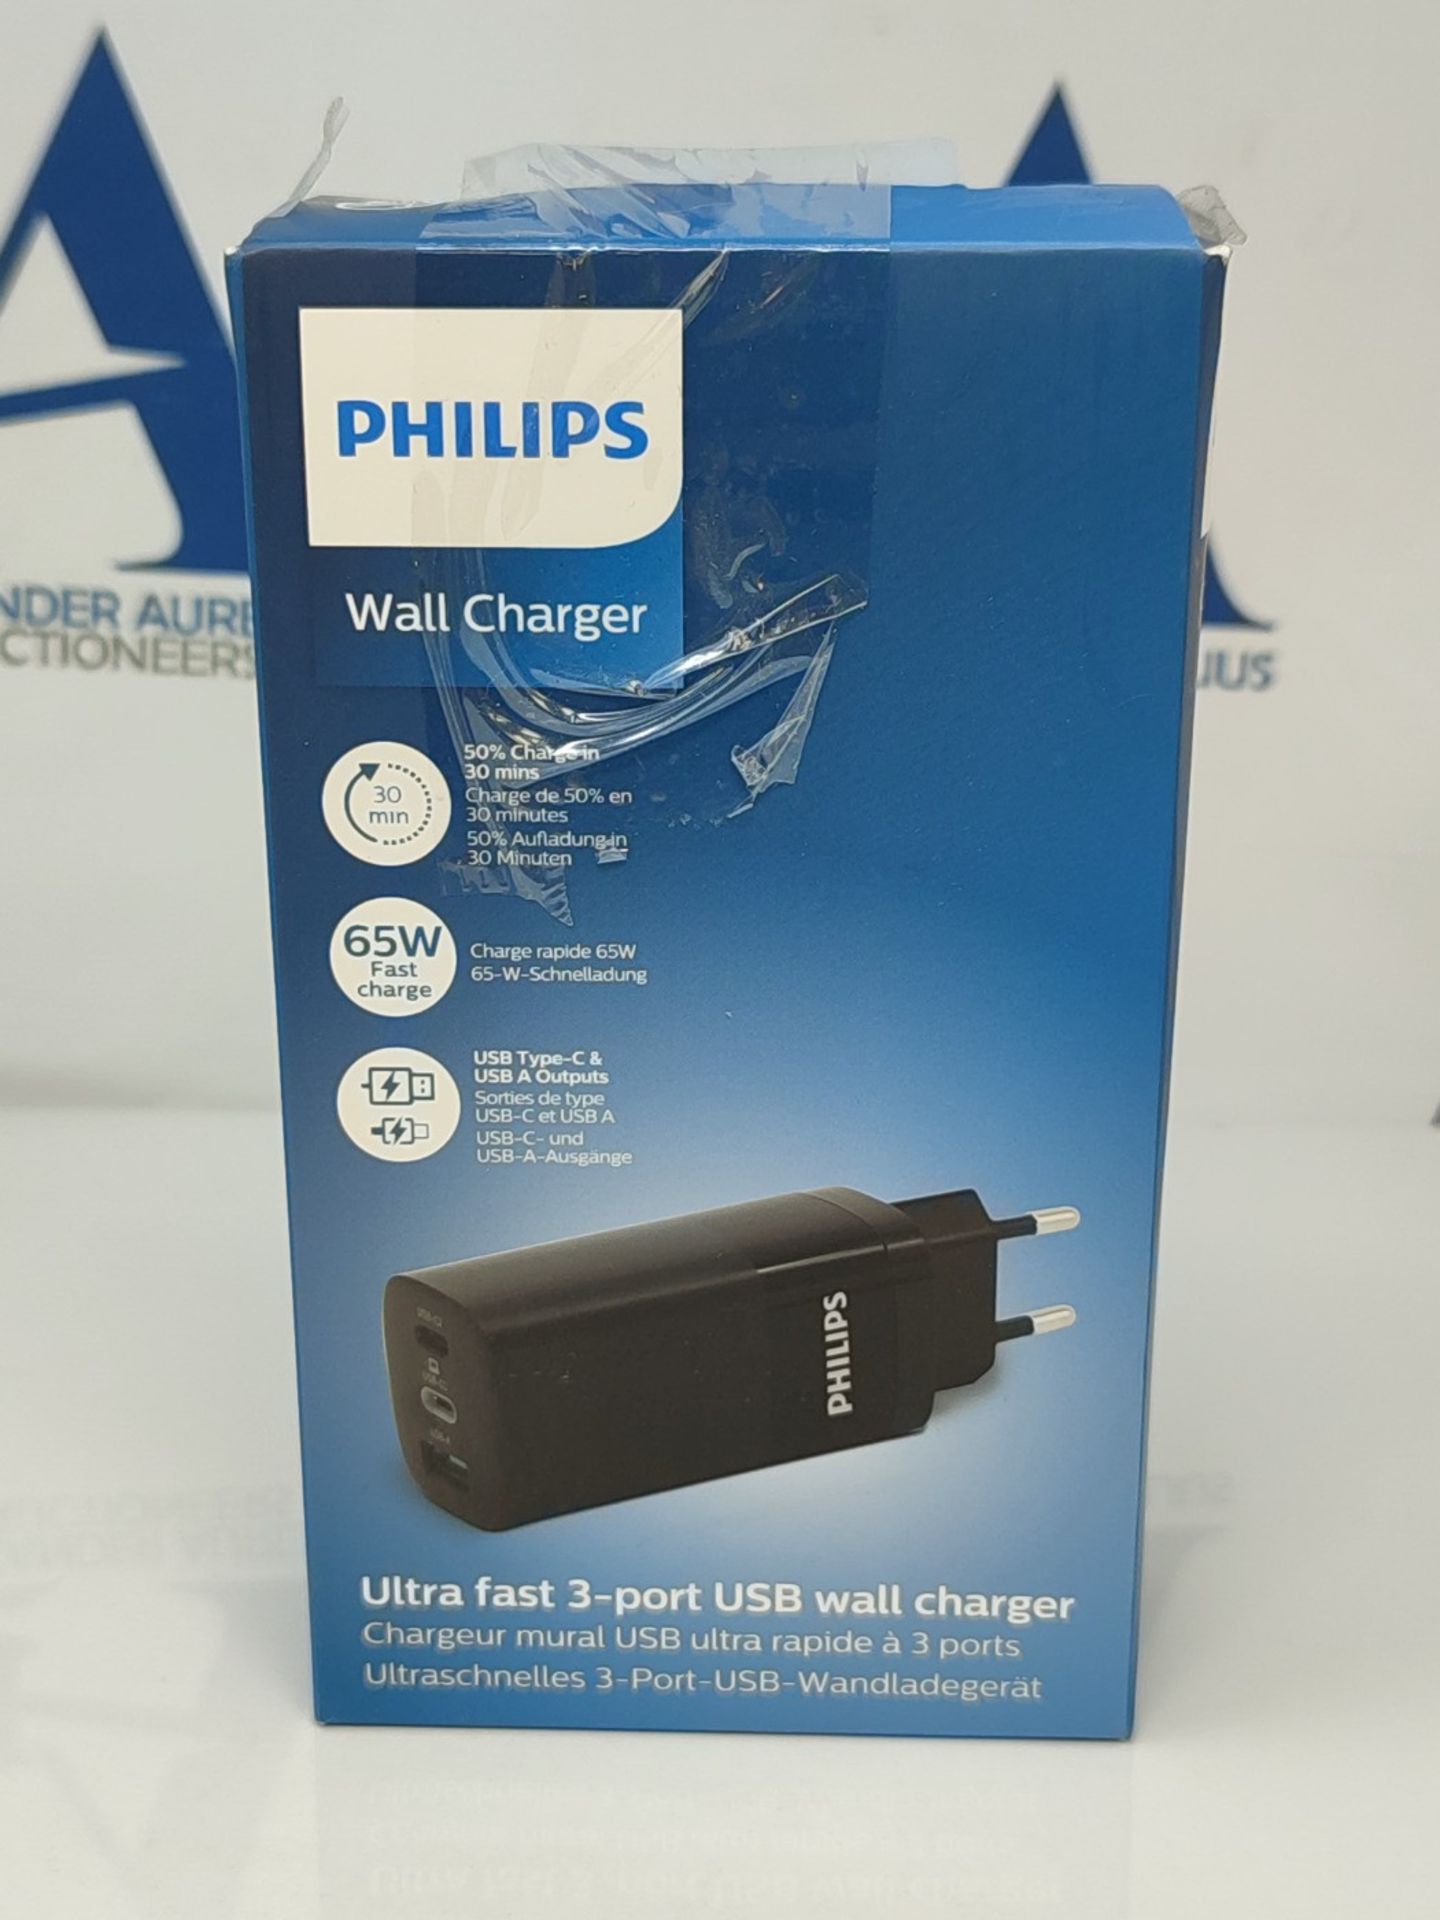 PHILIPS DLP2681/12 - Charger with 65W output power - USB-A and USB-C dual output - Bla - Image 2 of 6